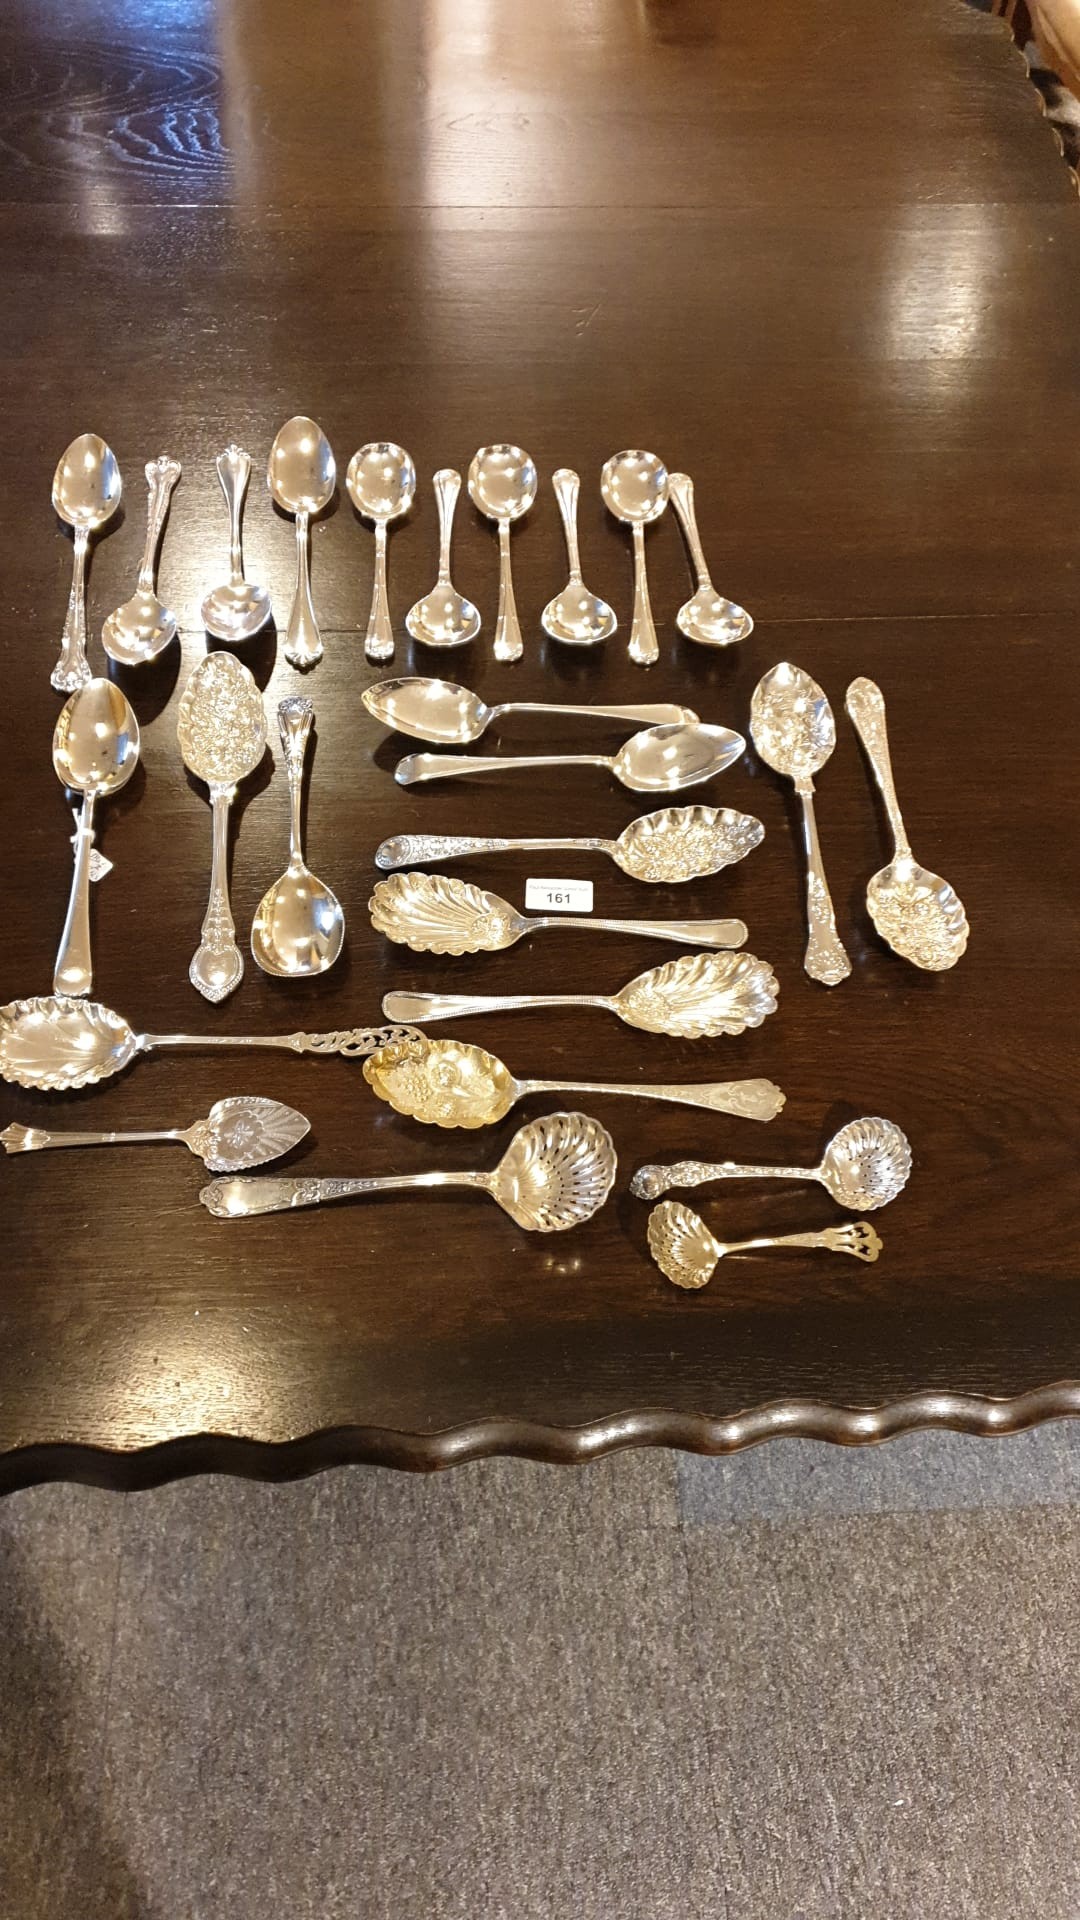 Large selection Berry Spoons Serving spoons Sifting ladles ect . - Image 2 of 5